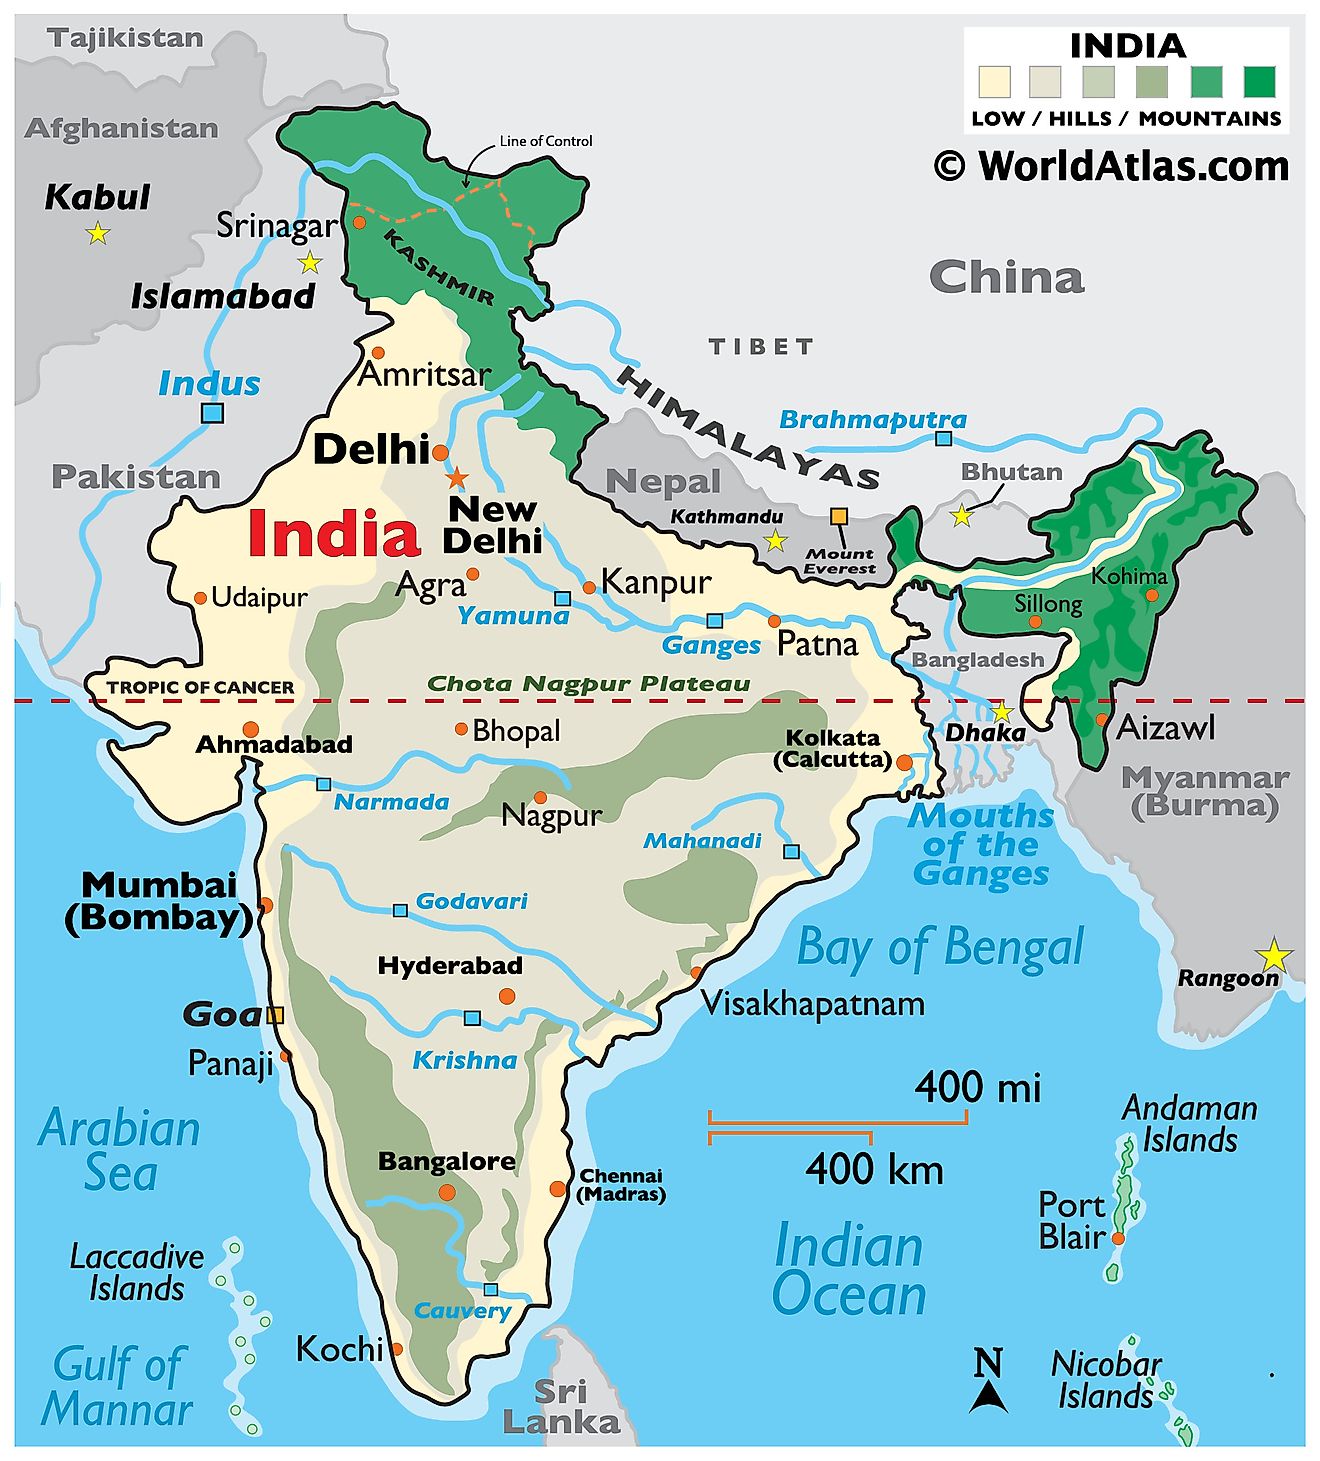 India Map Draw Photos and Images & Pictures | Shutterstock